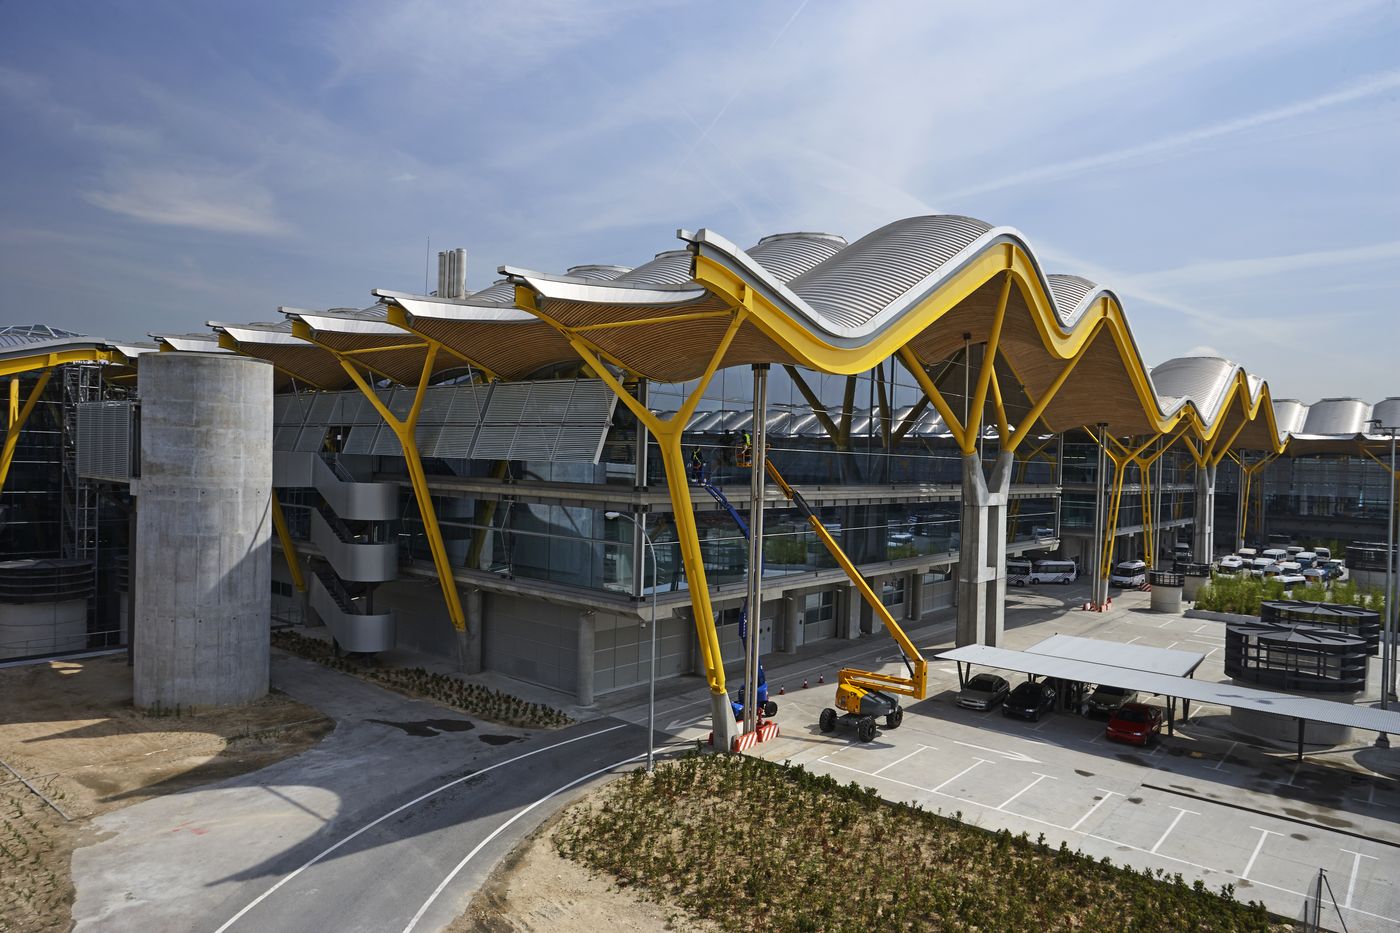 The yellow-trimmed exterior of Madrid Barajas International Airport. (Image: Shutterstock.com)